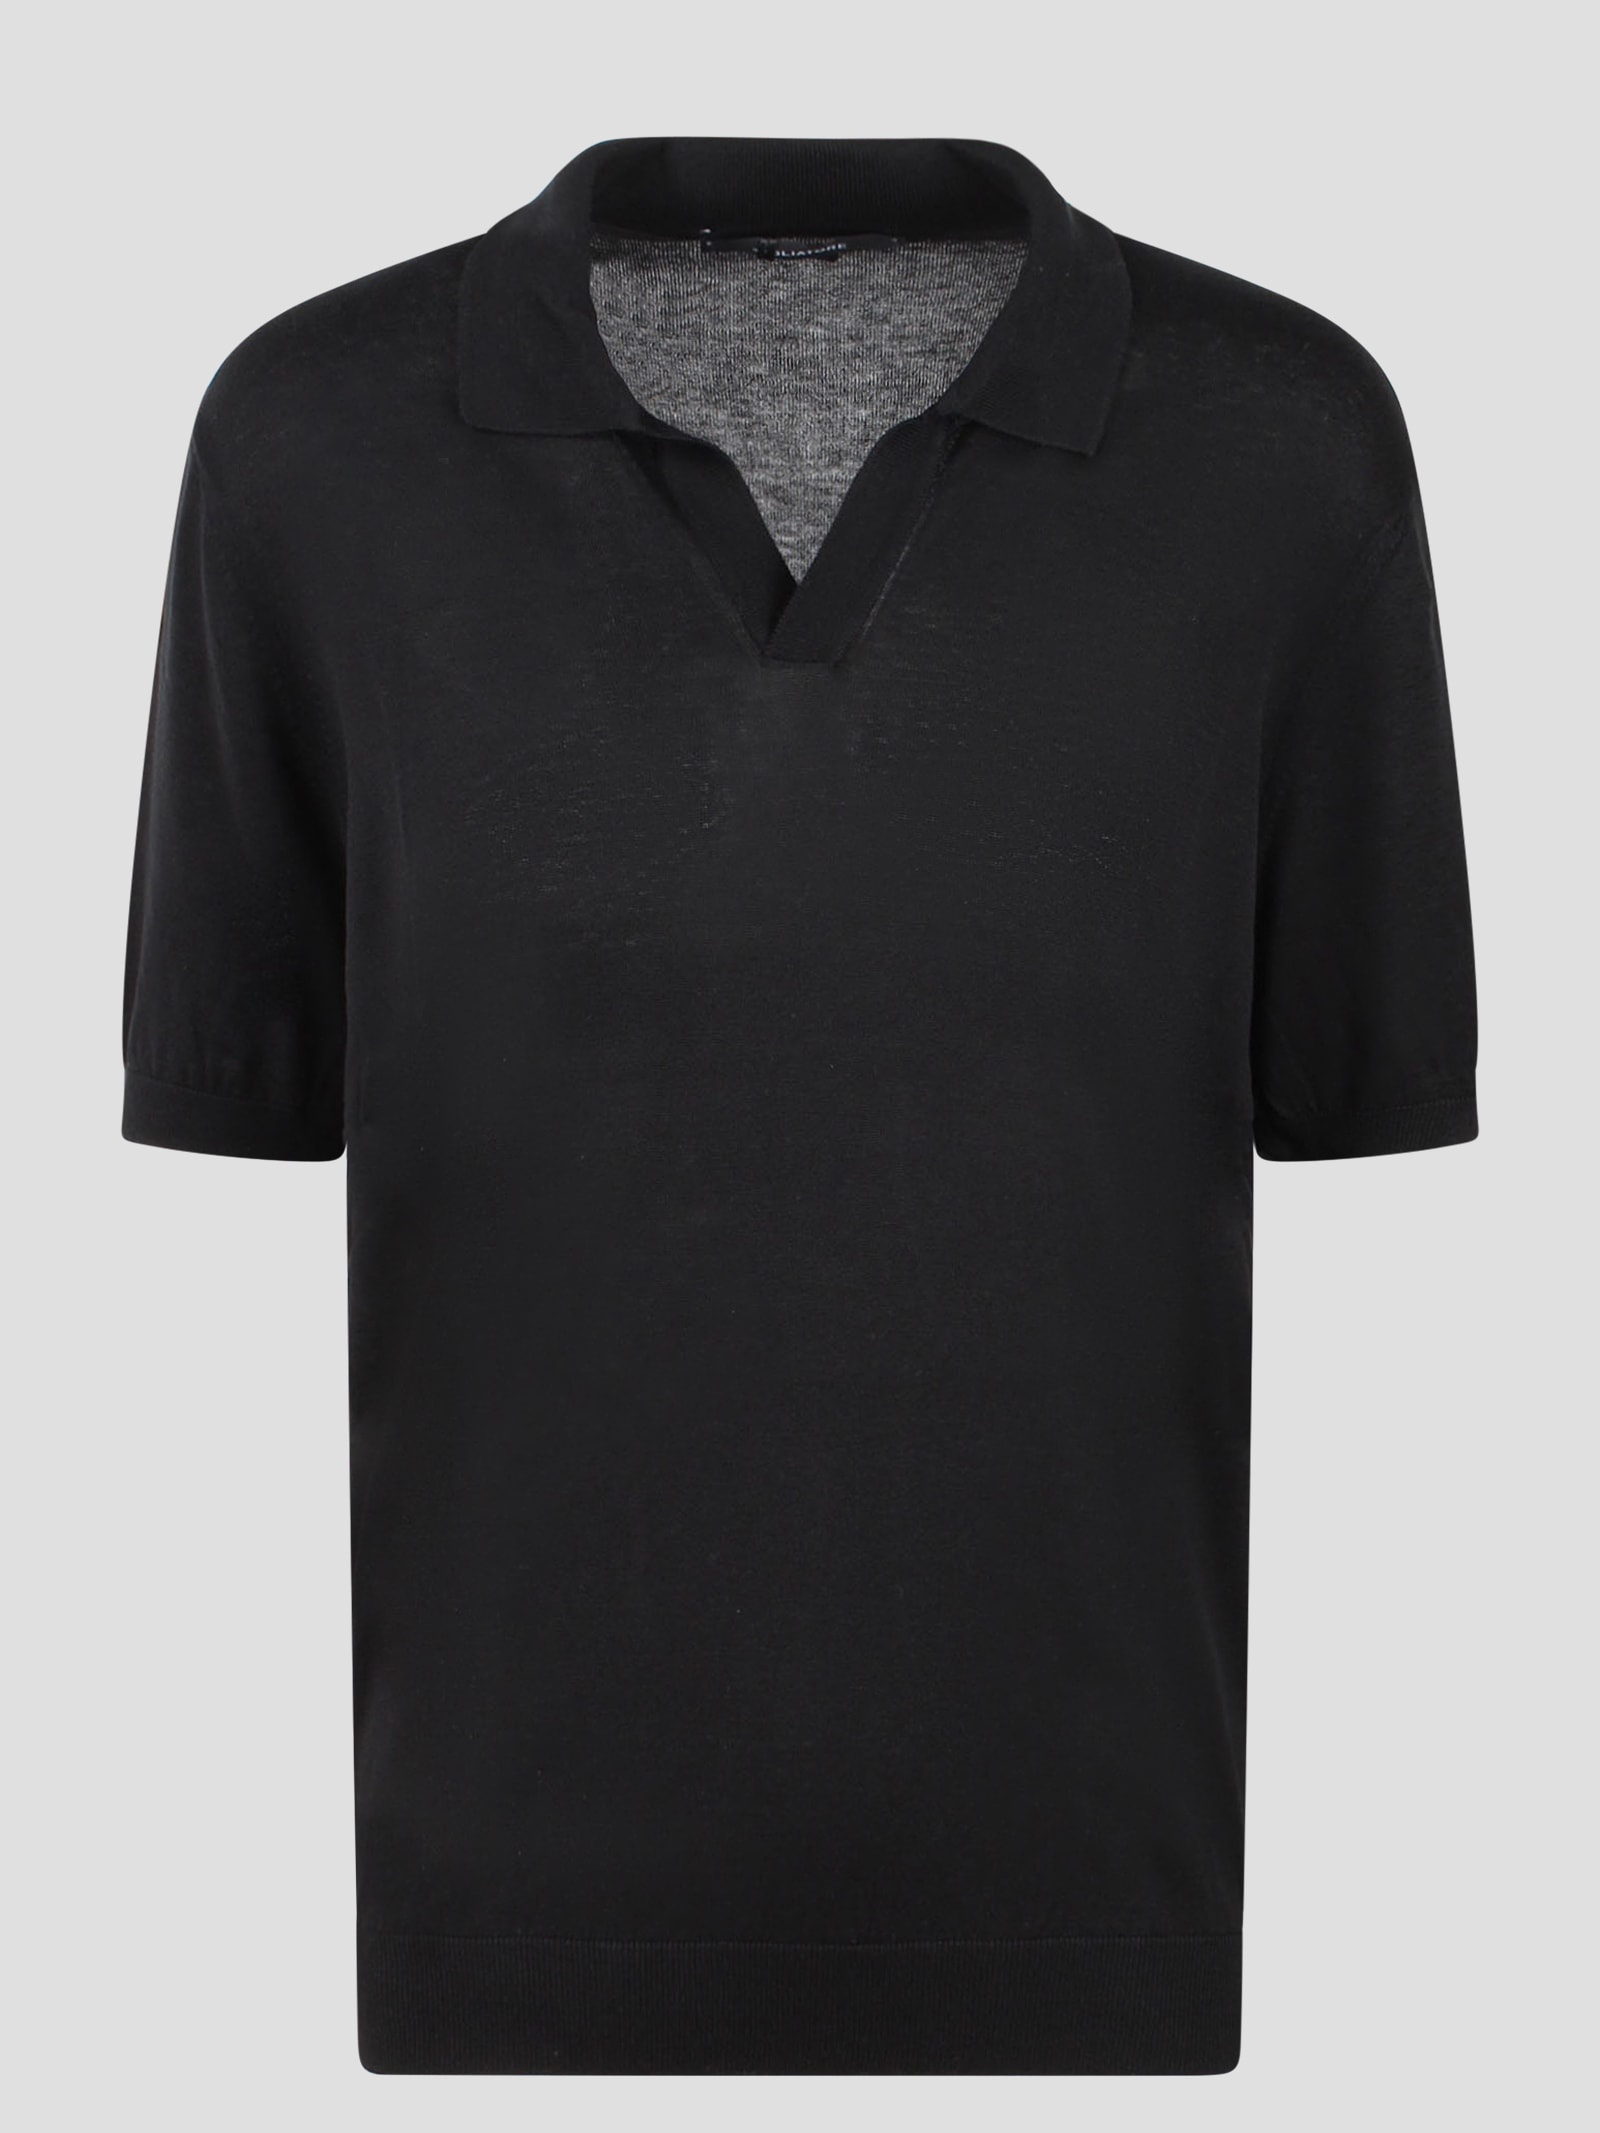 Tagliatore Open Collar Knitted Polo Shirt In Black